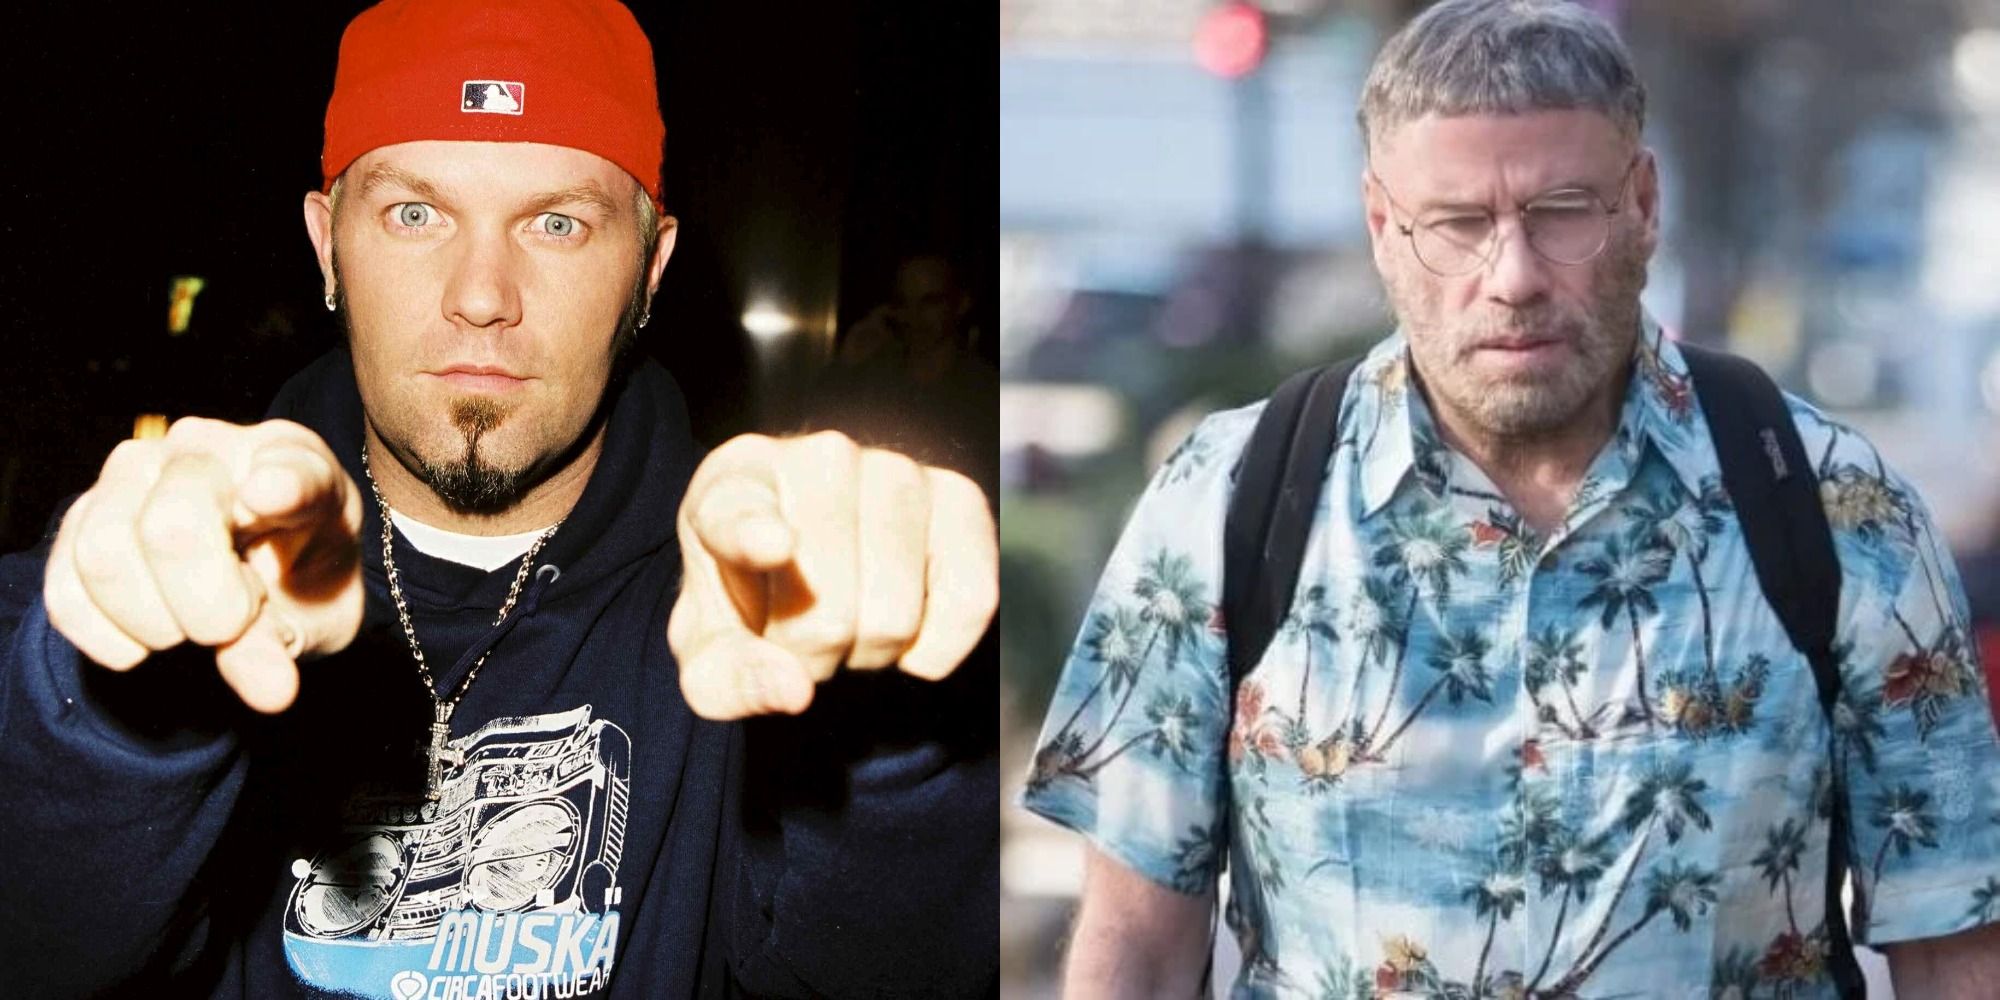 Fred Durst and The Fanatic